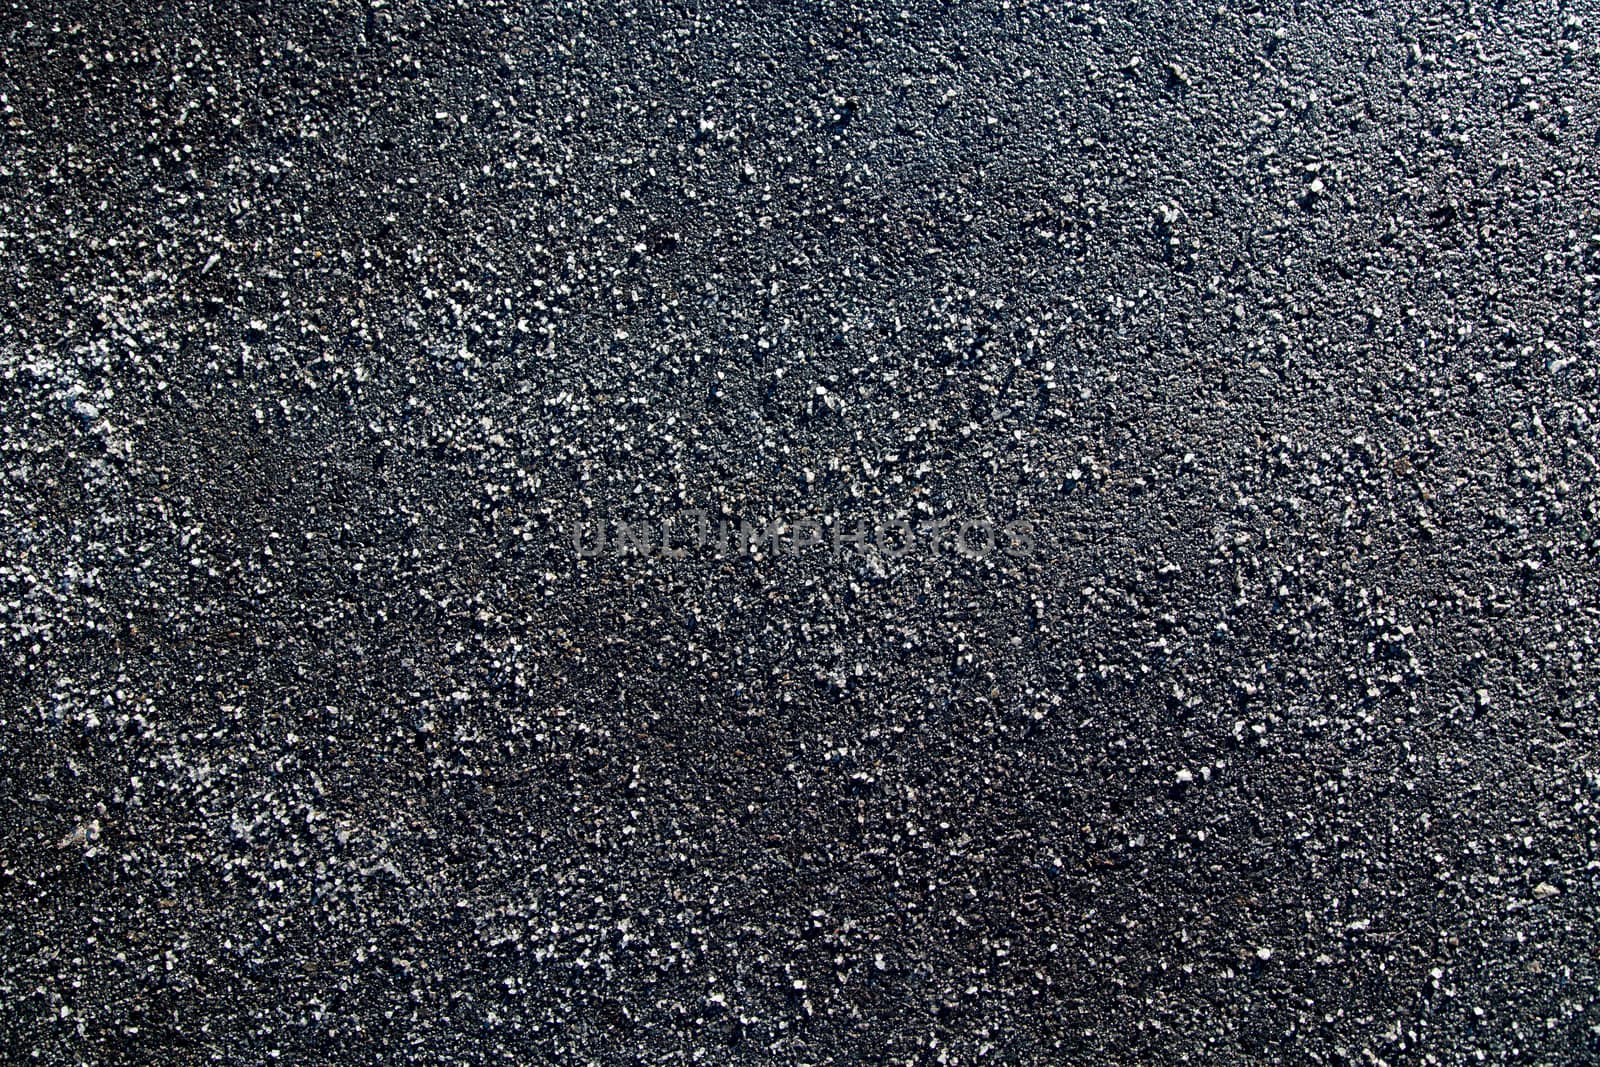 Picture of a piece of asphalt littered with salt